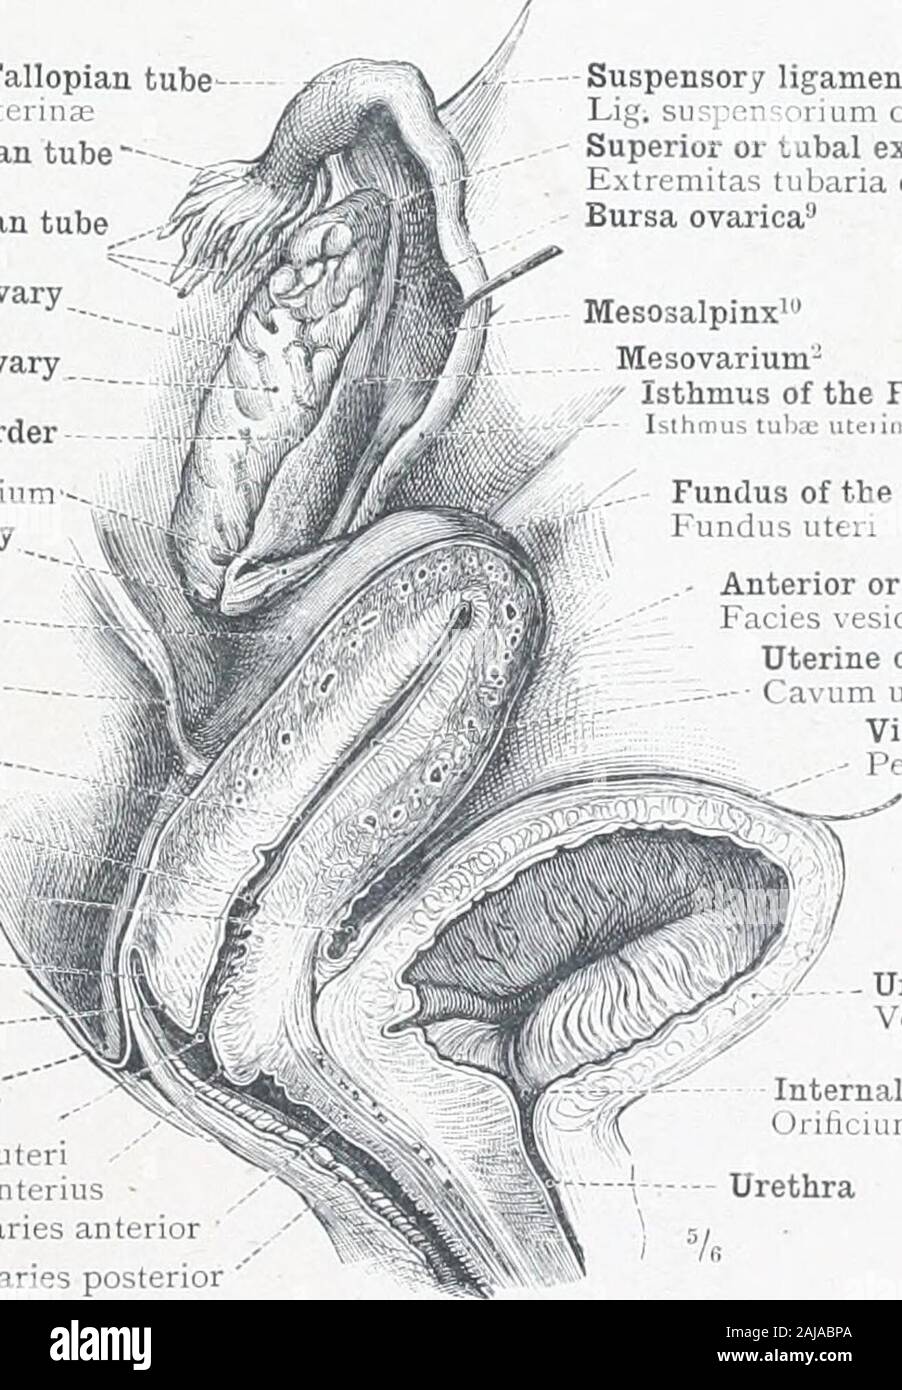 An atlas of human anatomy for students and physicians . tuba; ulerina.Infundibulum of the Fallopian tube -Infundibulum tuba; uterina; Fimbrije of the Fallopian tubeFimbria- tub:e iiterin:cPosterior, convex, or free border of the ovaryMargo liber ovarii Internal surface of the ovaryFacies medialis o.ariiAnterior, straight, or attached border JI.ai-;;o mesovaricus Ligament of the ovary—Lig. ovarii proprium-Inferior or uterine extremity of the ovaryExtremitas uterina ovarii Posterior or intestinal surface of theuterus—Facies intestinalis uteriUterosacral ligament, or fold of Douglas^.Plica recto- Stock Photo